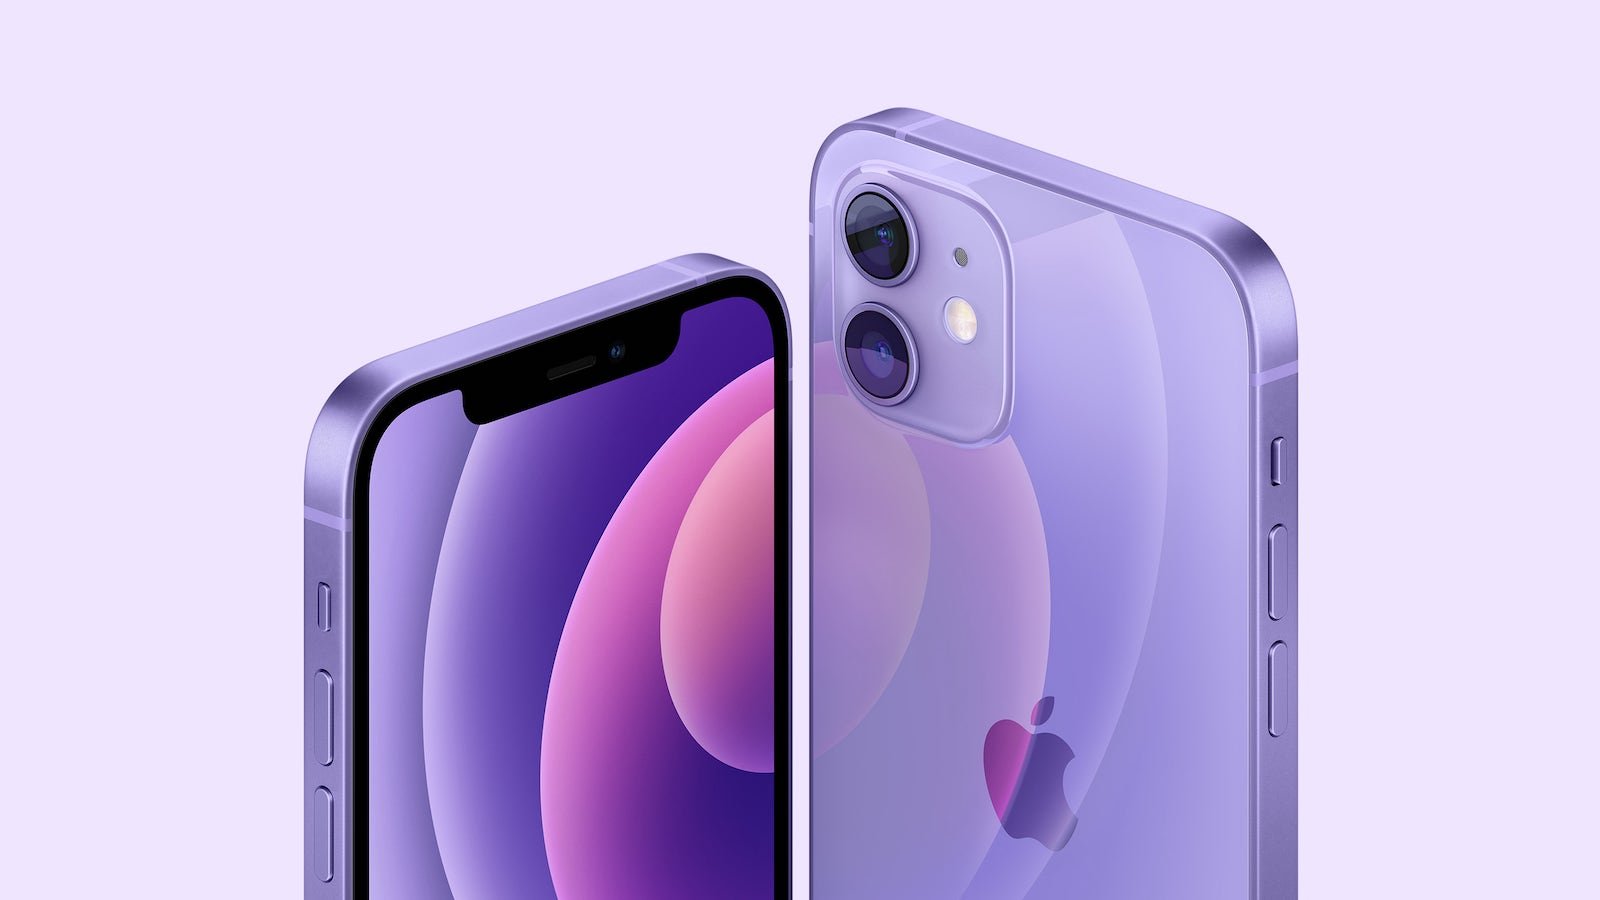 Apple iPhone 12 & 12 mini 5G smartphones now come in a gorgeous purple option